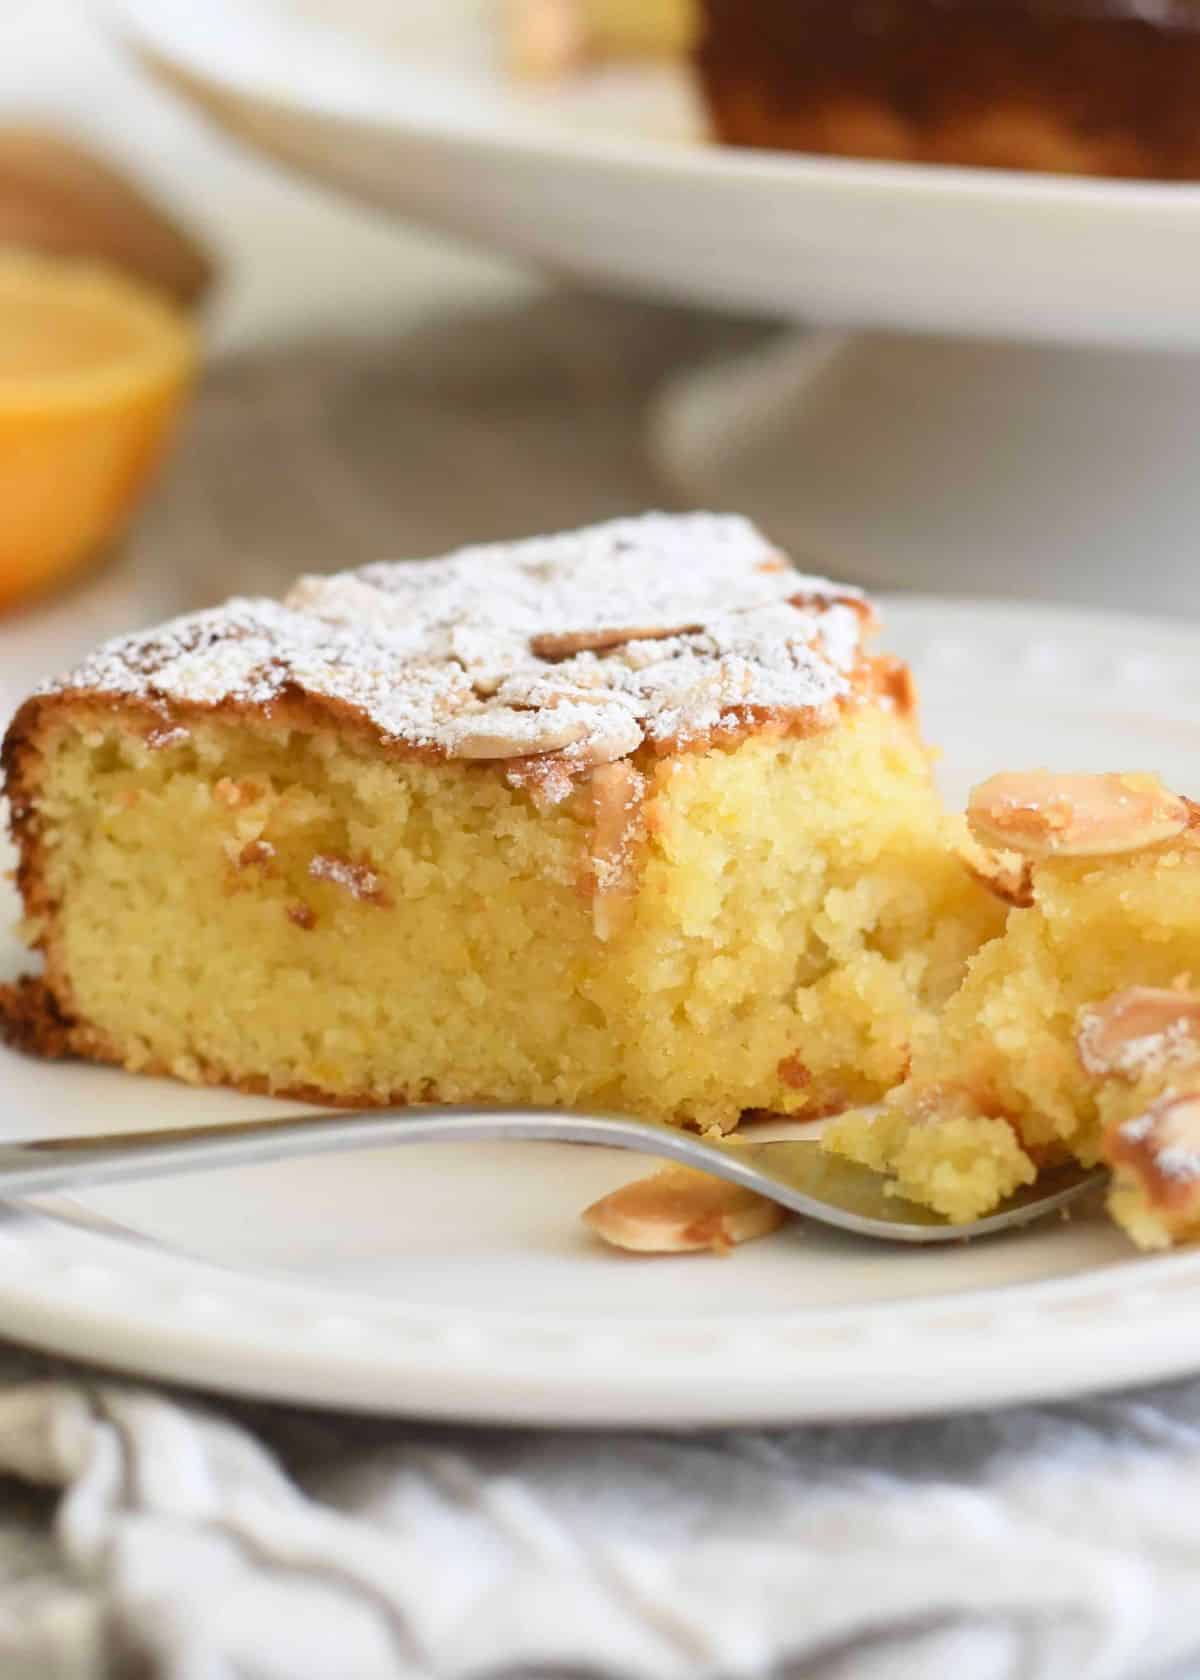 A piece of Italian Gluten-Free Almond, Orange Cake on a white plate with a fork.